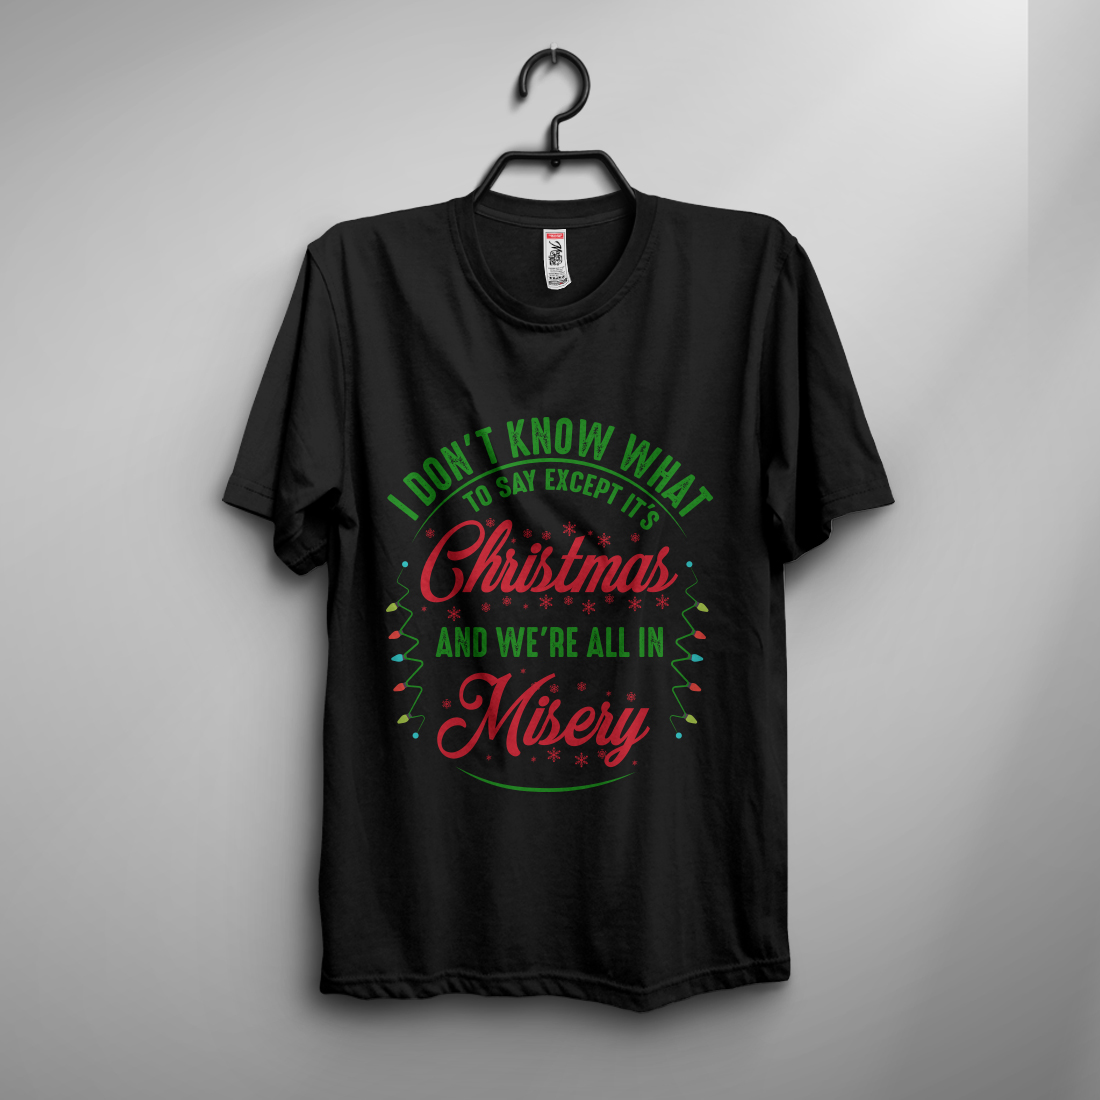 I don't know what to say except it's christmas and we're all in misery T-shirt design cover image.